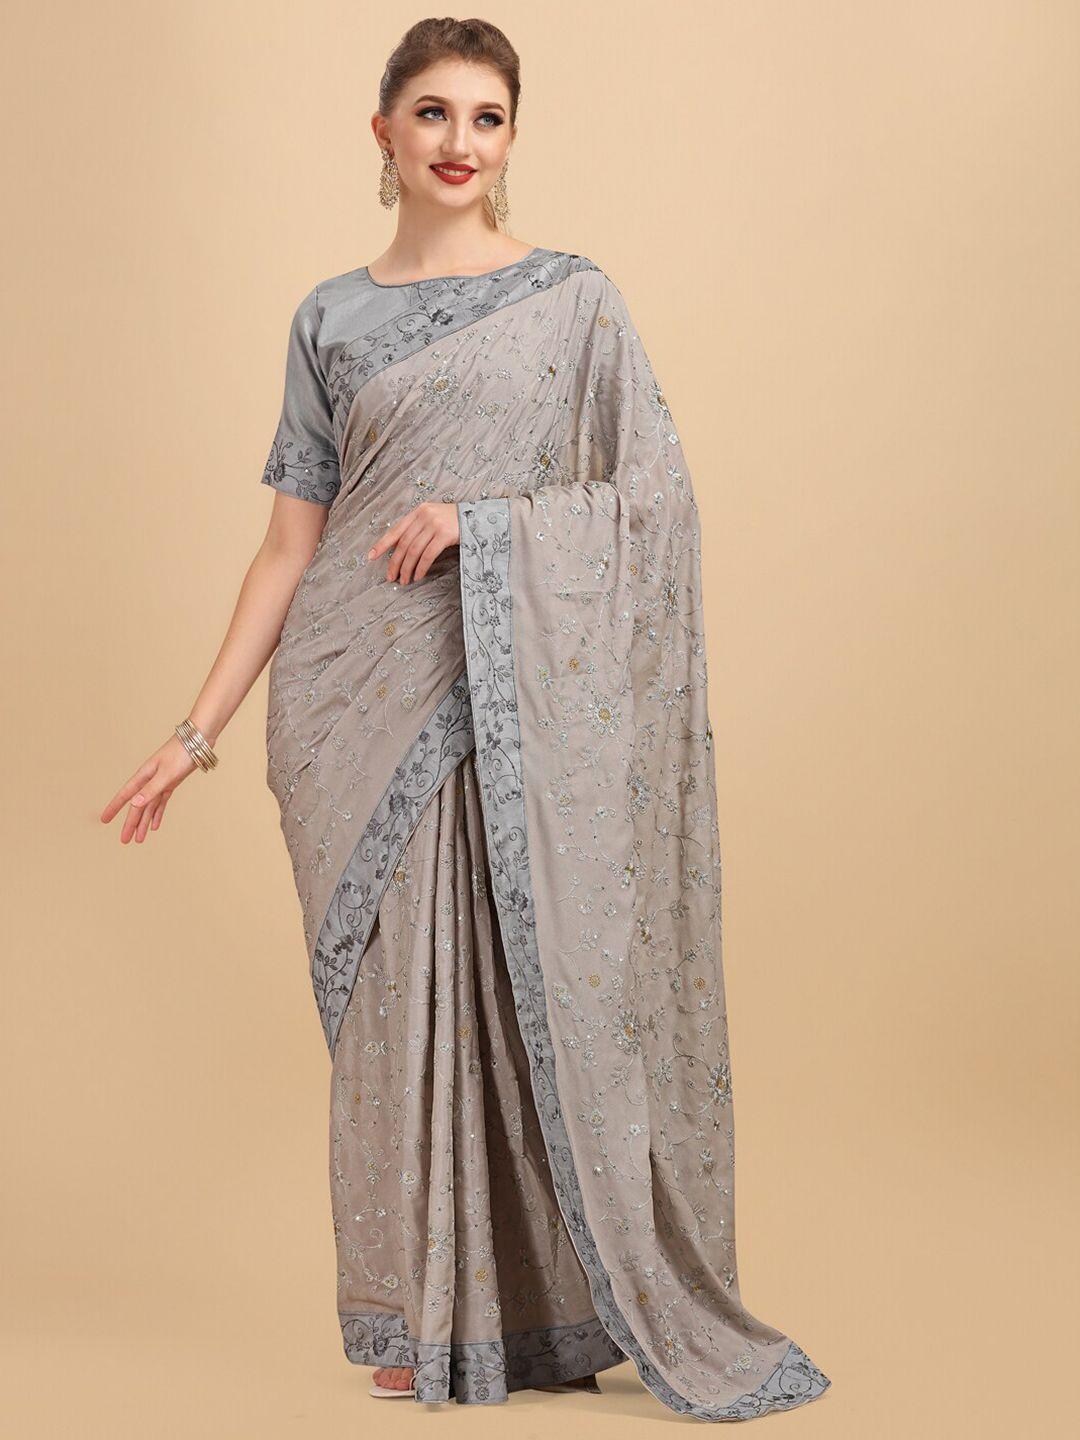 sangria grey & silver-toned floral embroidered silk blend heavy work saree